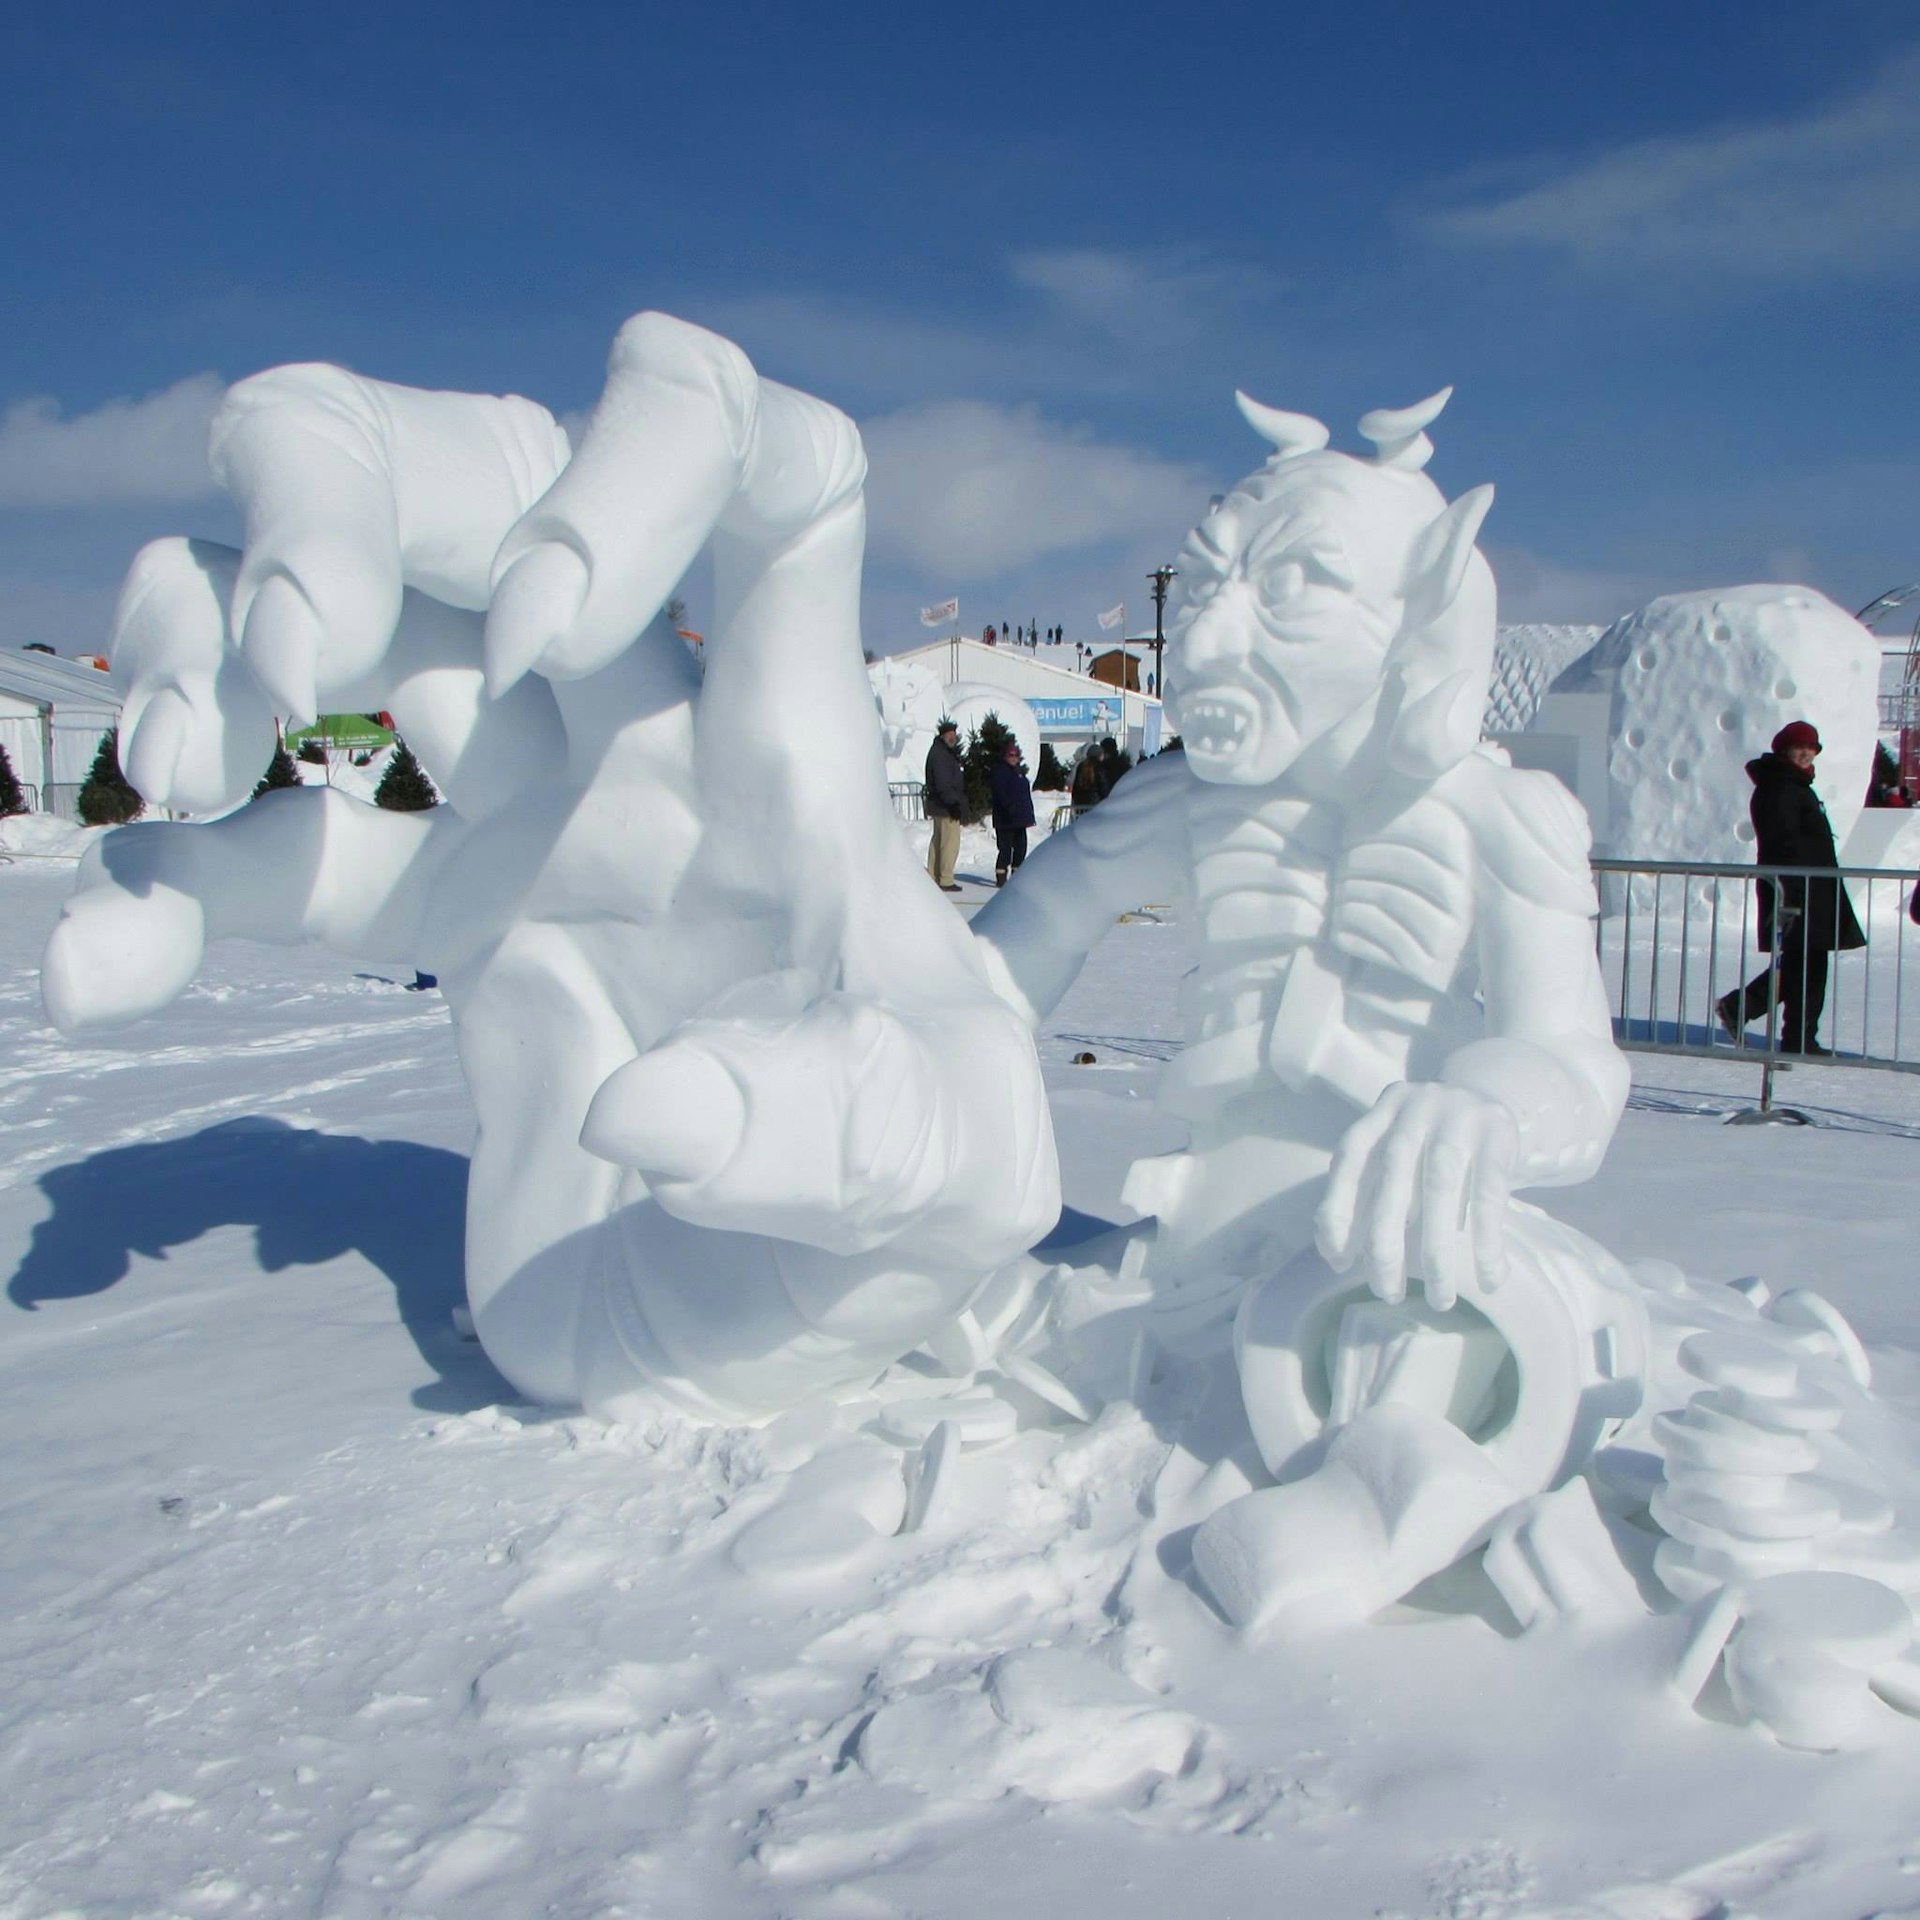 A larger-than-life size sculpture of a demon, with his hand outstretched to the camera, is carved from snow and ice in Québec City.